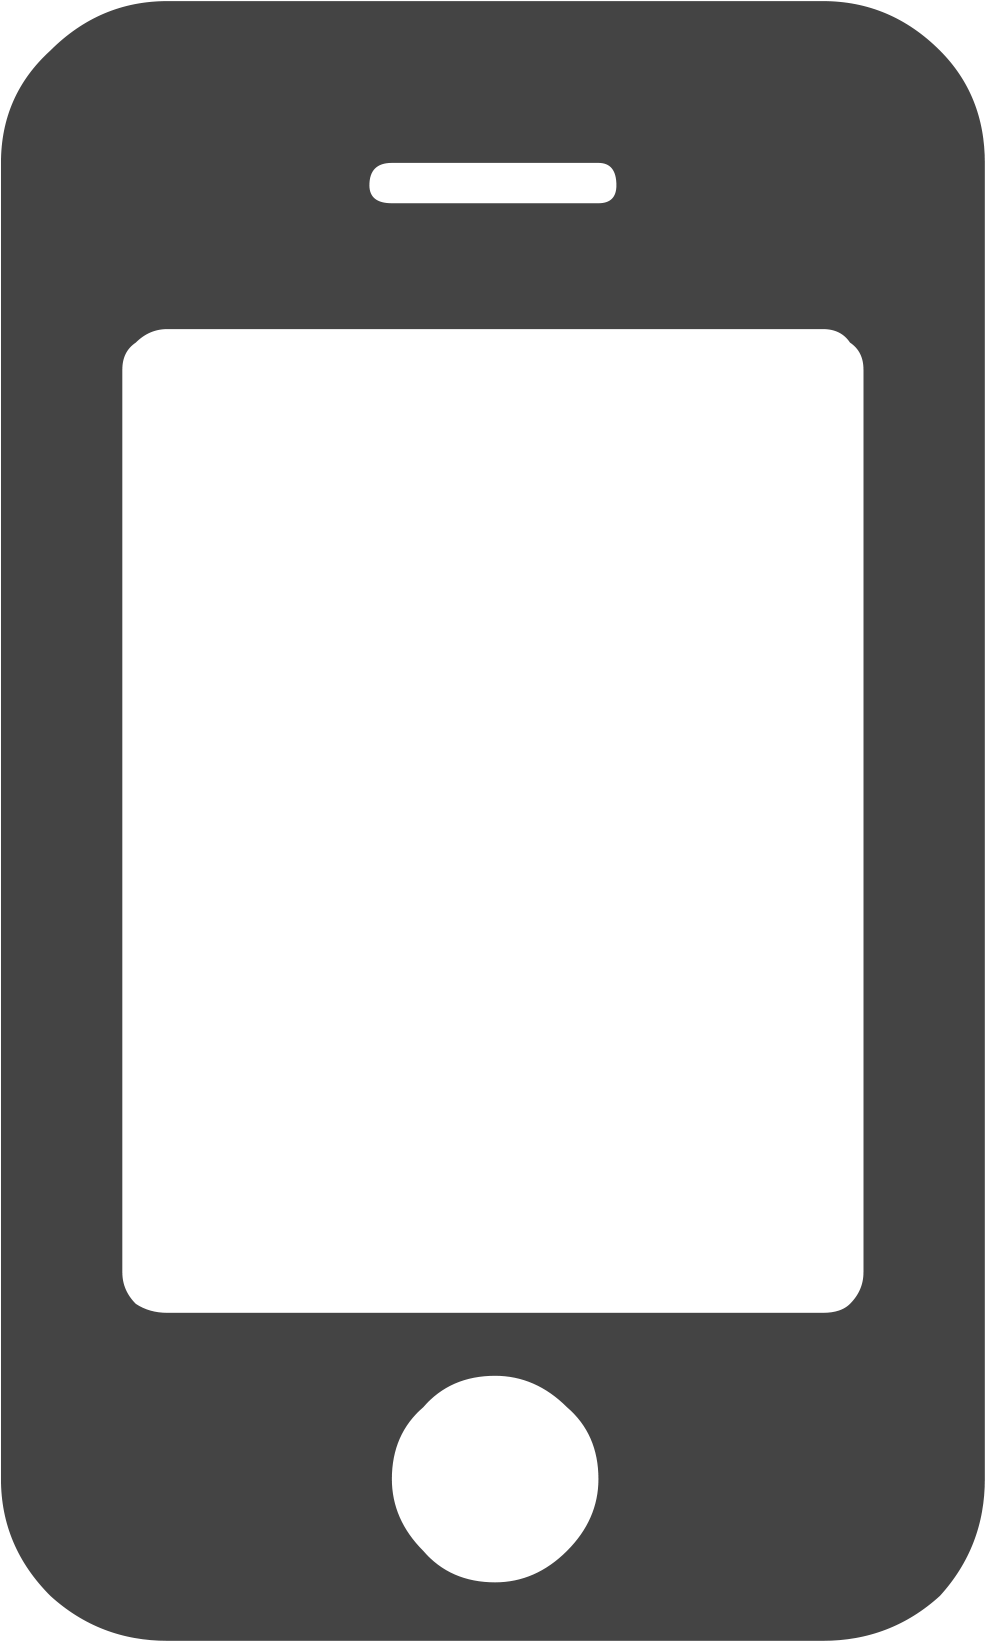 A Black Rectangular Object With A Gray Border